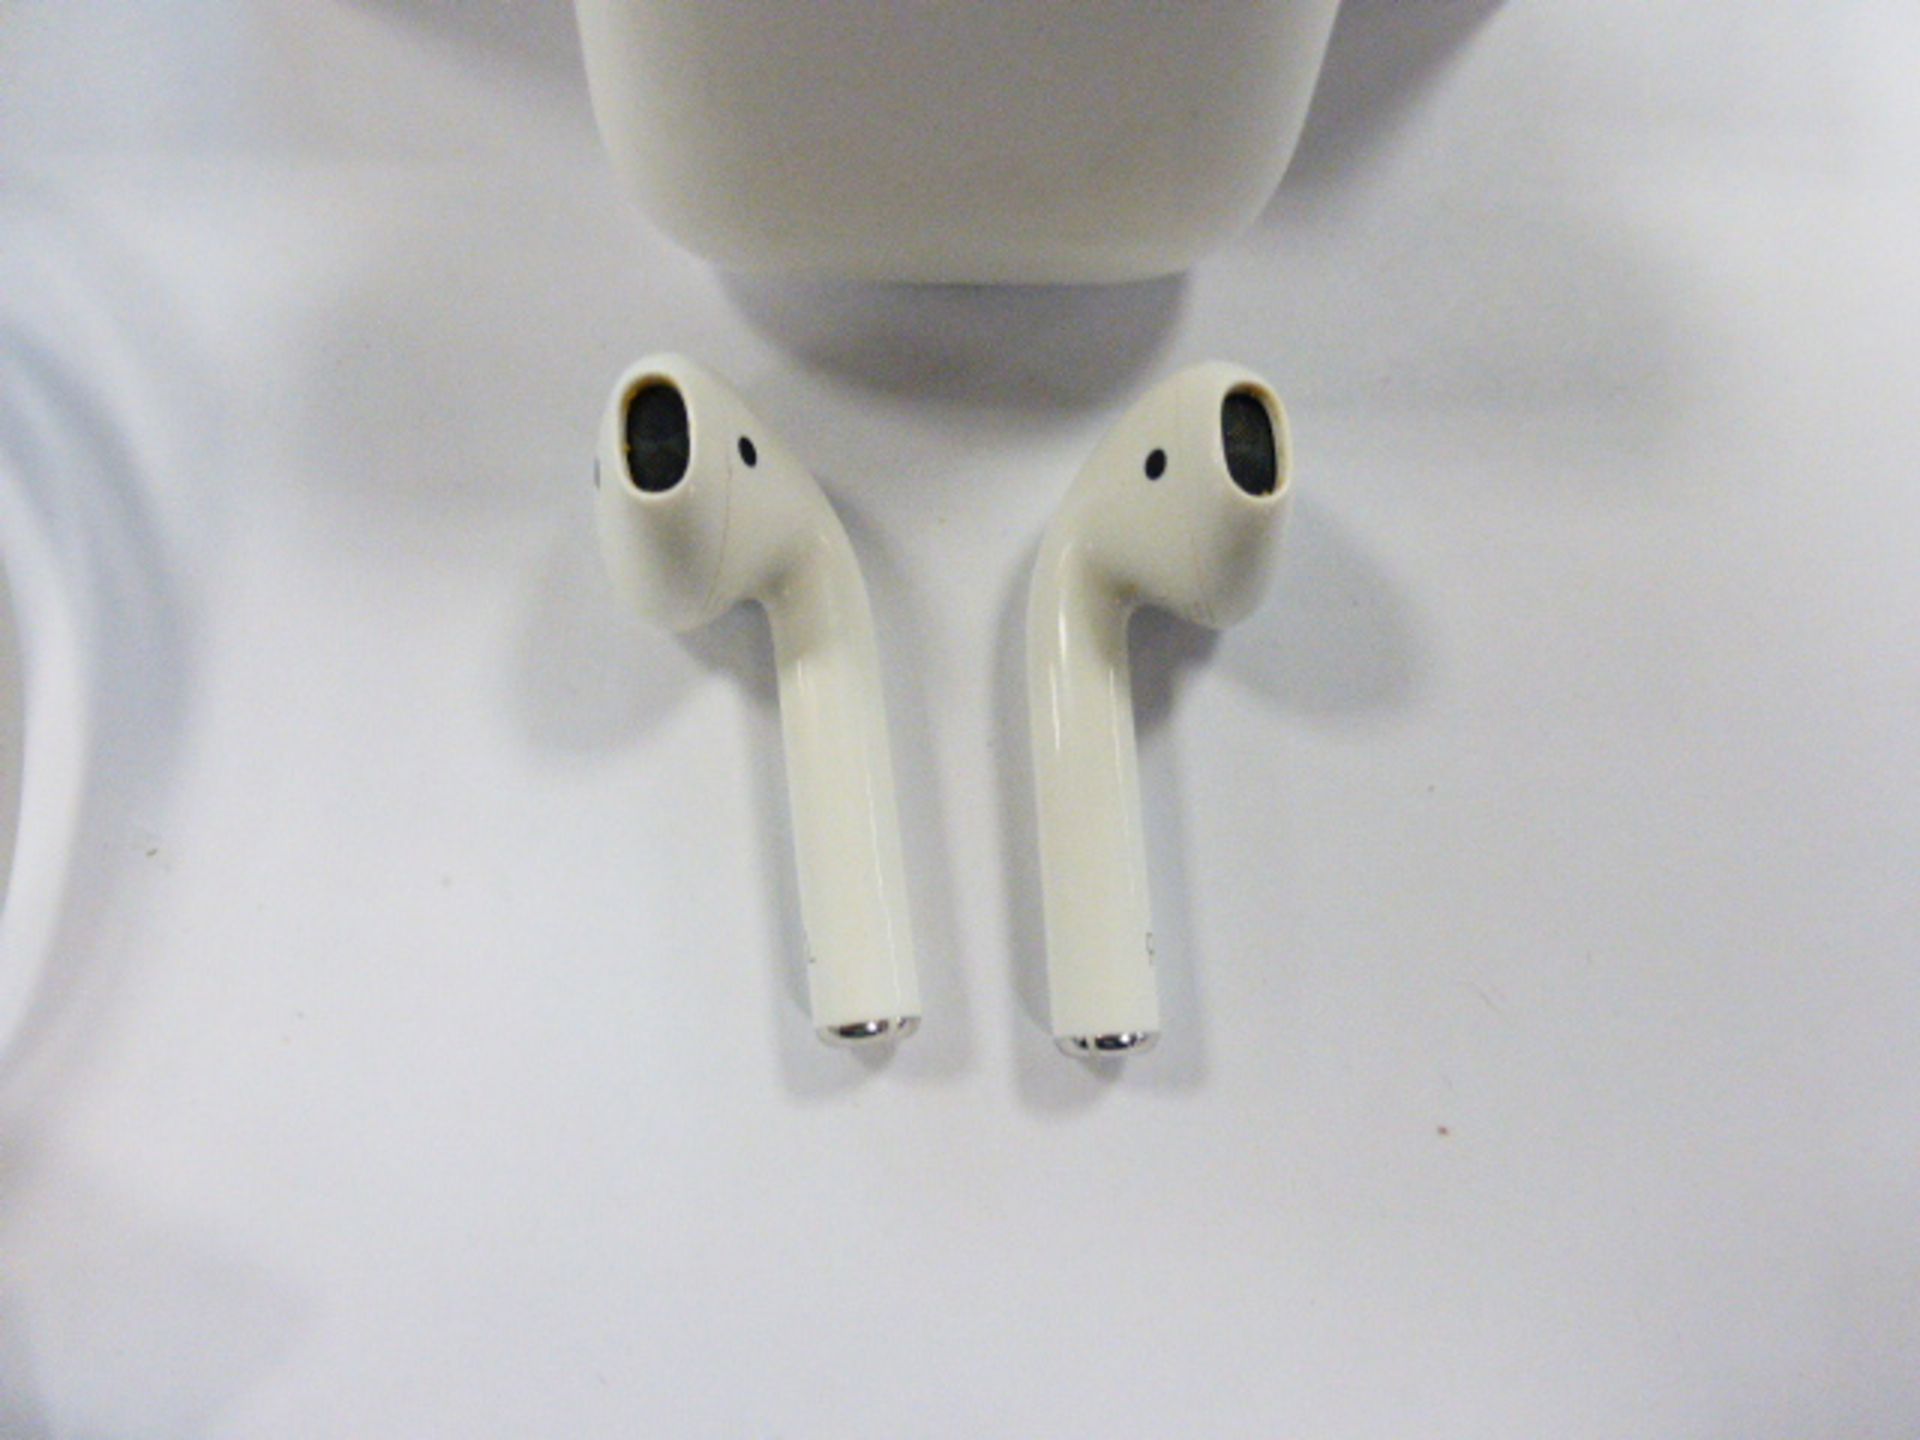 Apple airpods 2nd gen with wireless charging case and box - Image 2 of 2